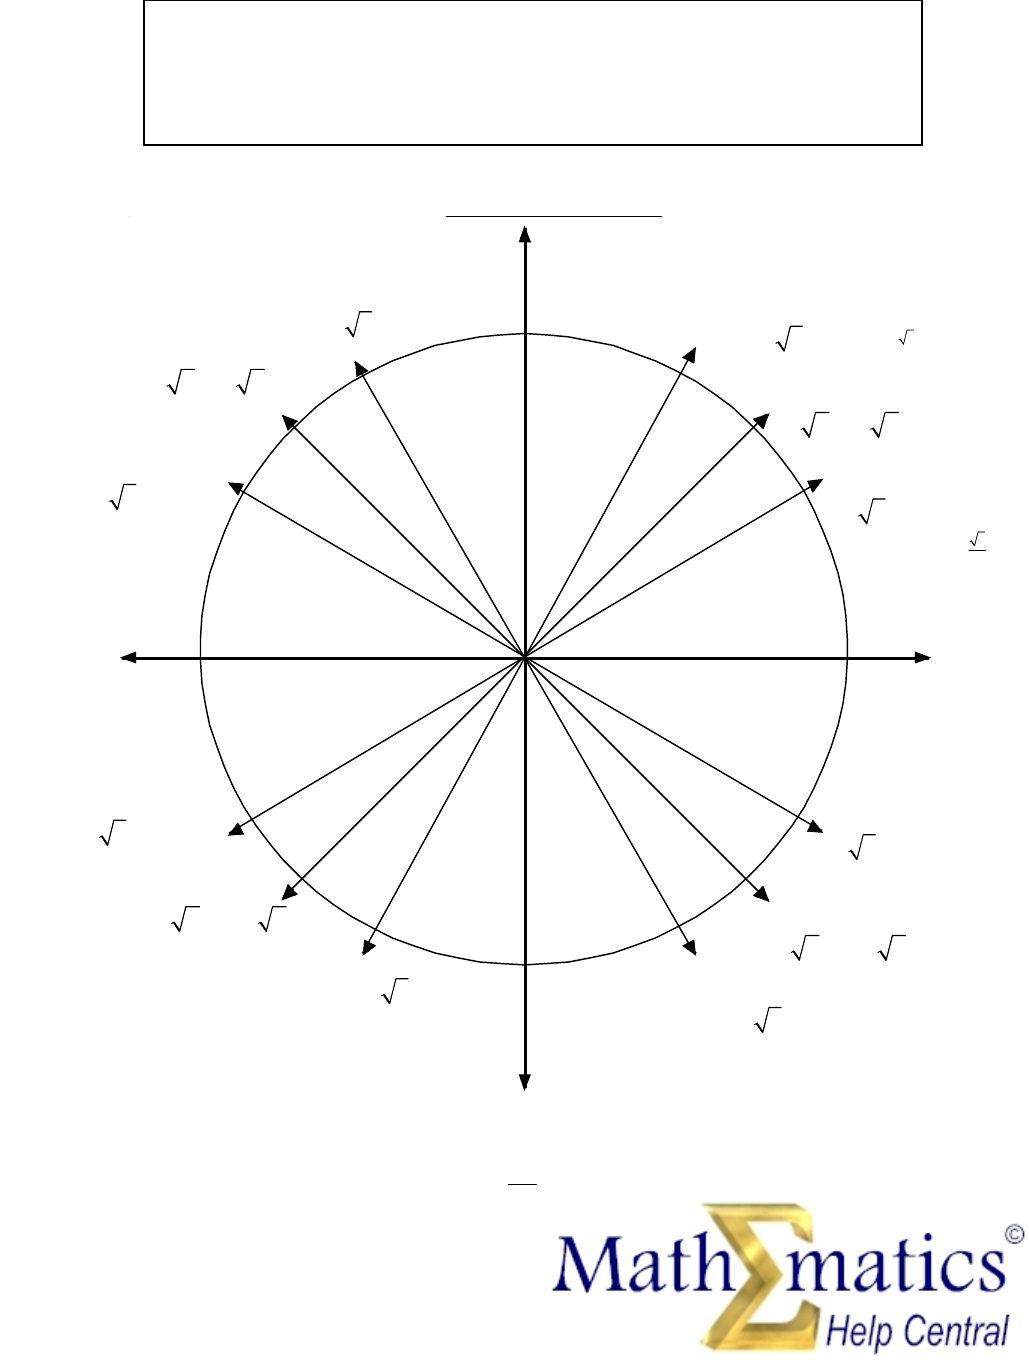 Angles And Radians of A Unit Circle